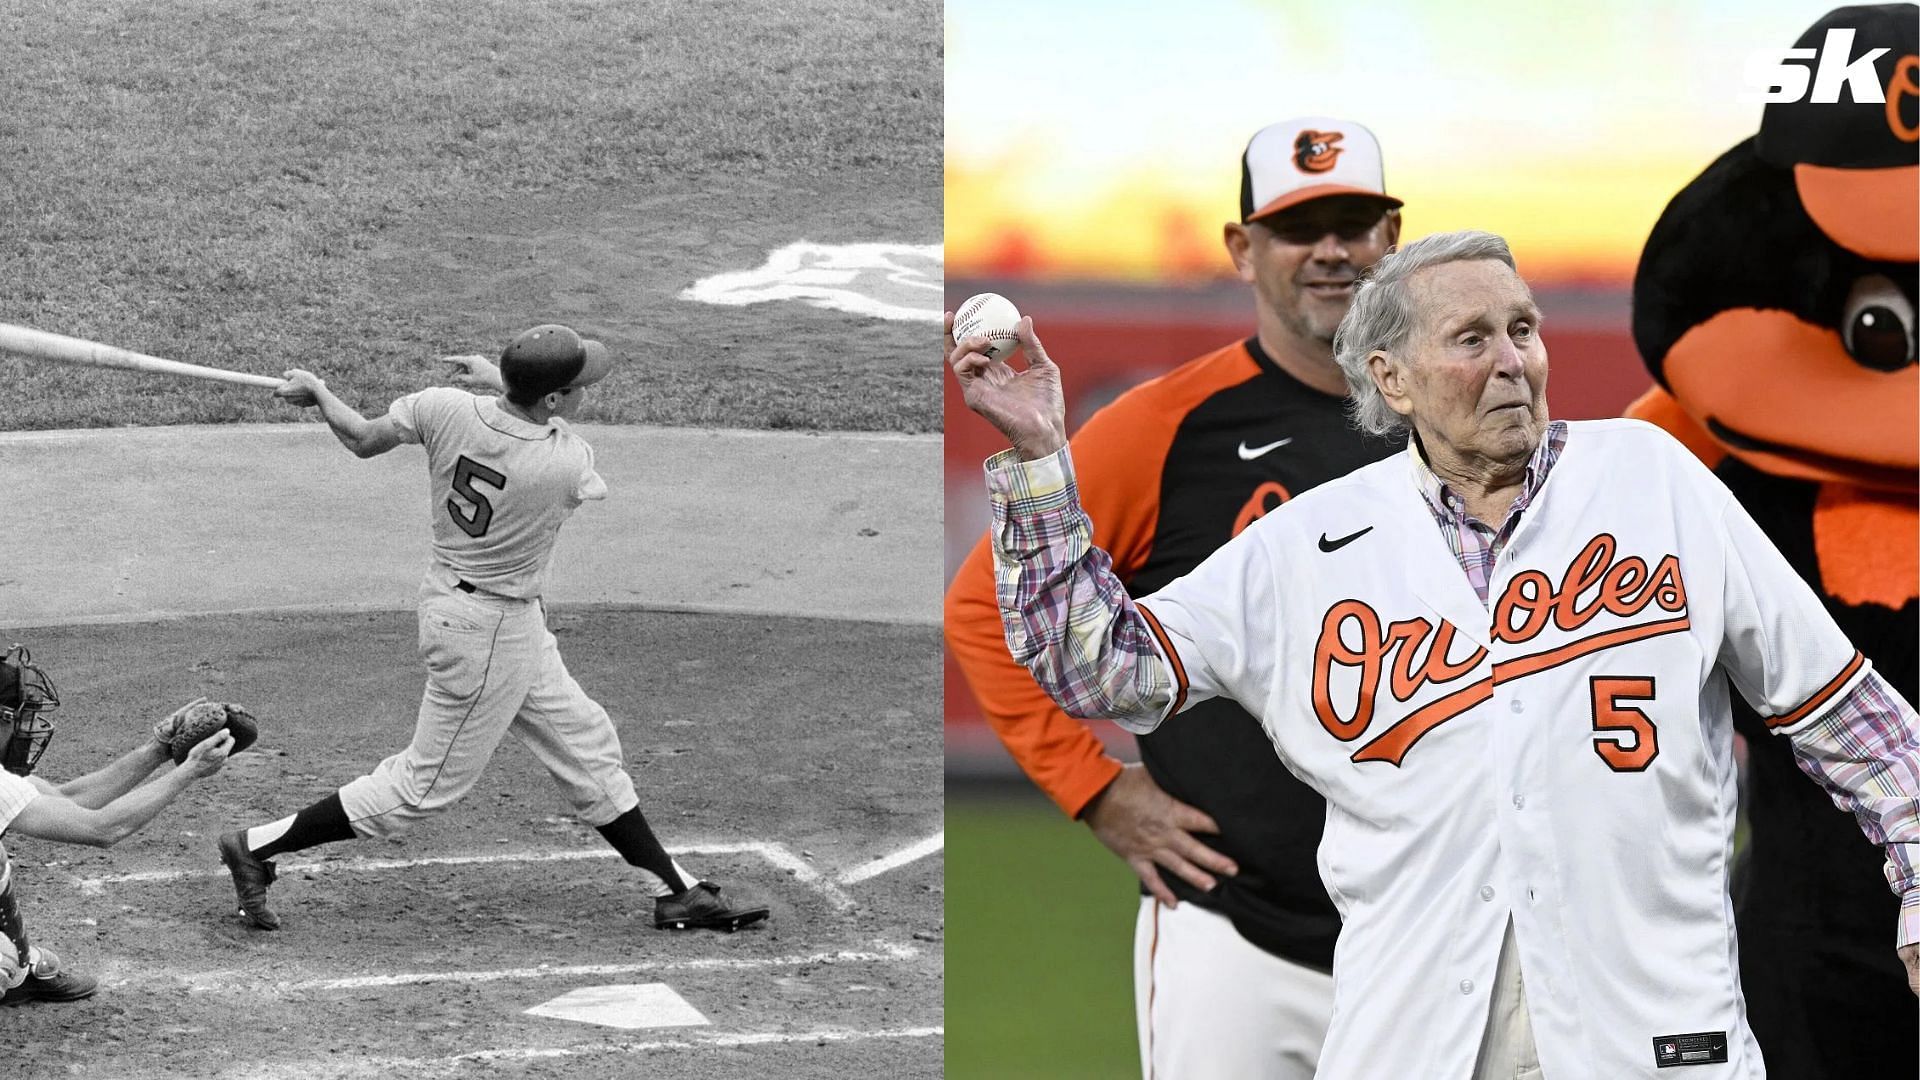 Brooks Robinson, Hall of Fame third baseman for Orioles, dies at 86